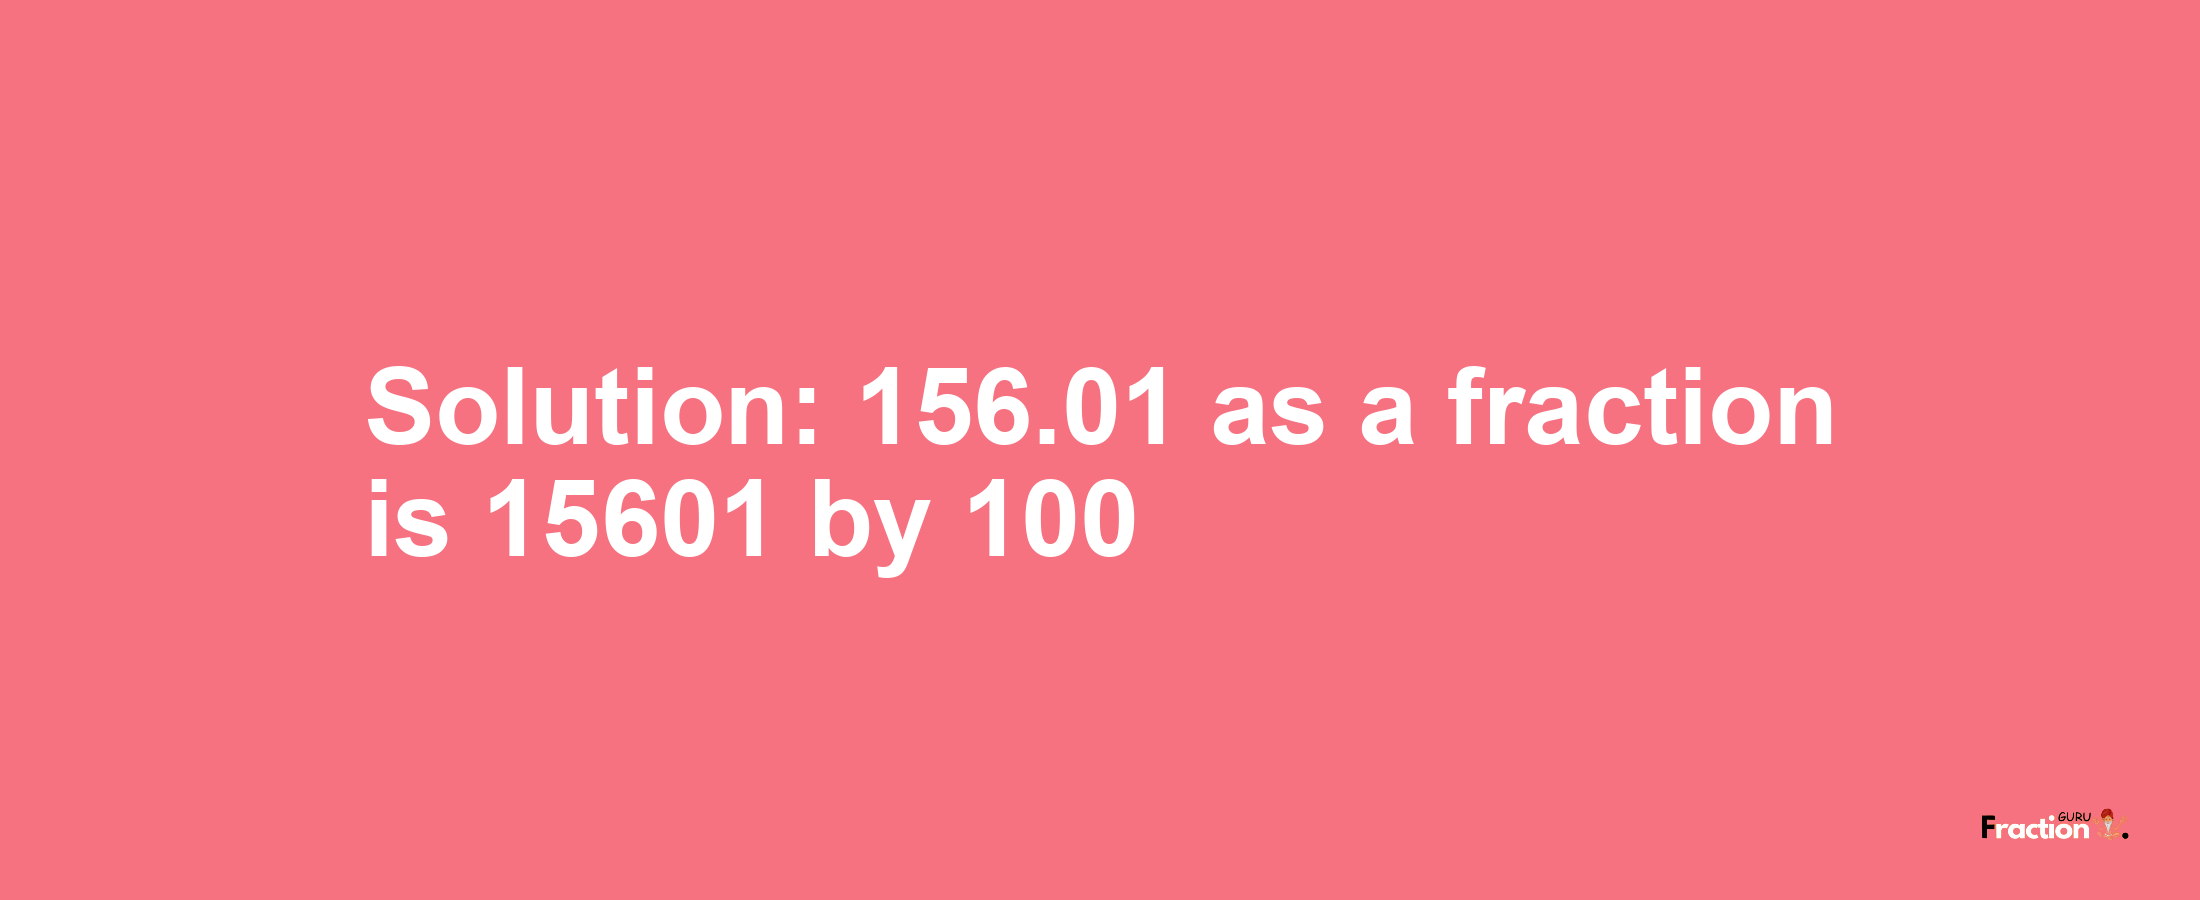 Solution:156.01 as a fraction is 15601/100